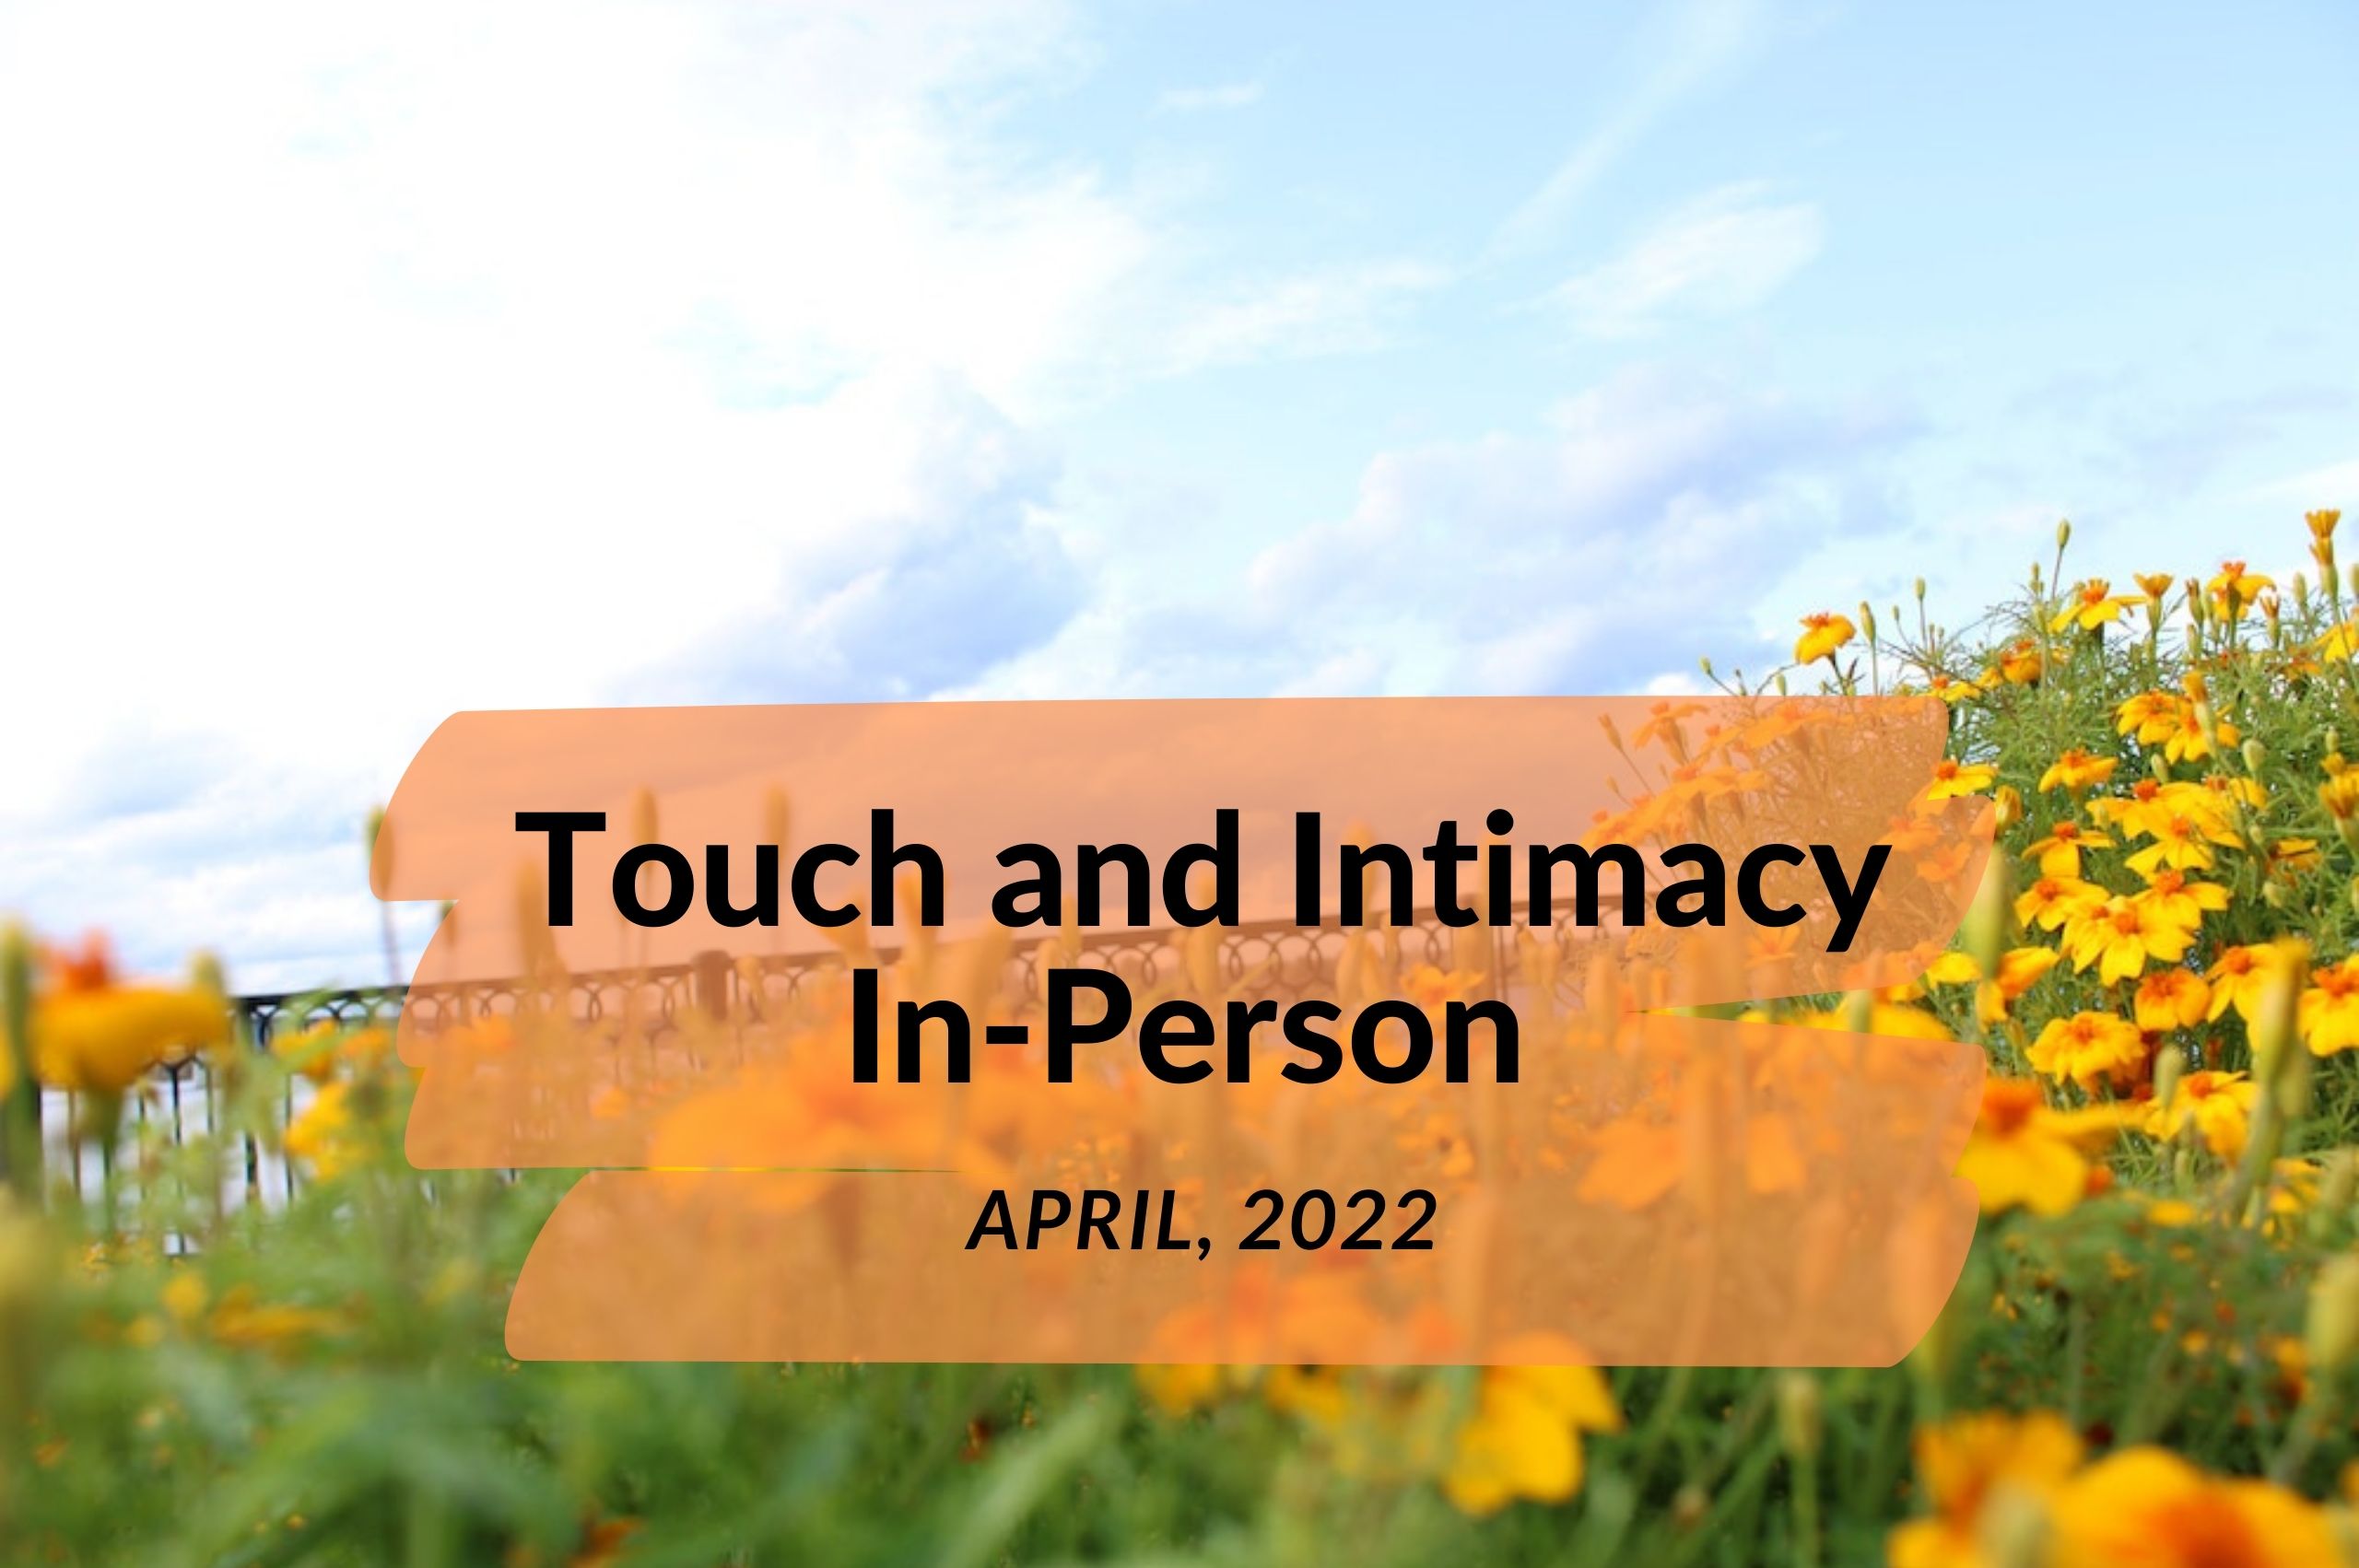 Blue sky and grass landscape photo with yellow flowers, words across say Touch and Intimacy In-Person April 2022